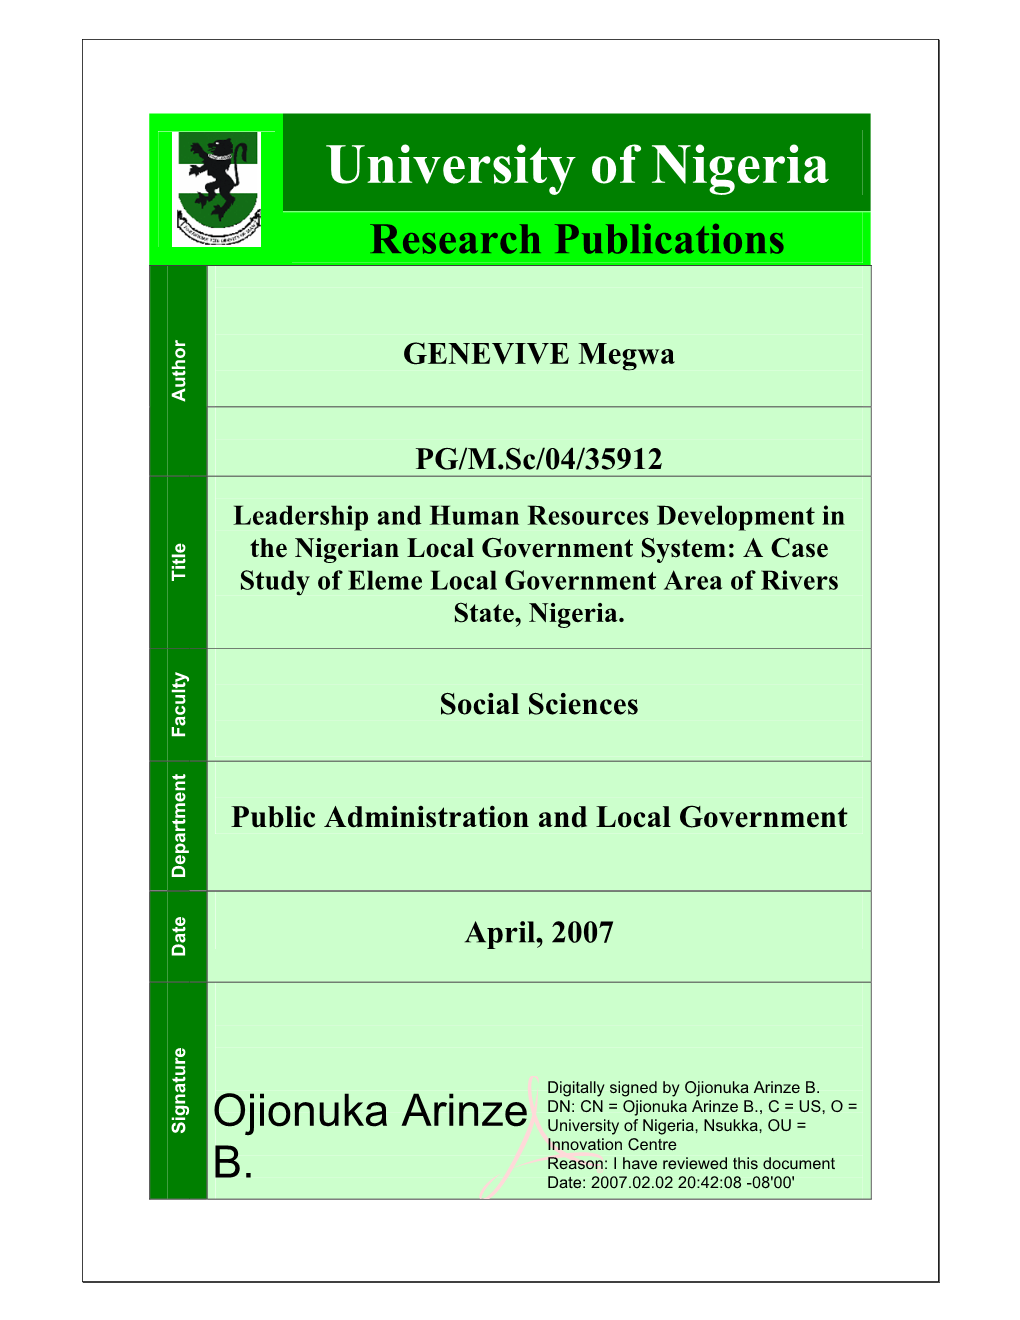 A Case Study of Eleme Local Government Area of Rivers State, Nigeria